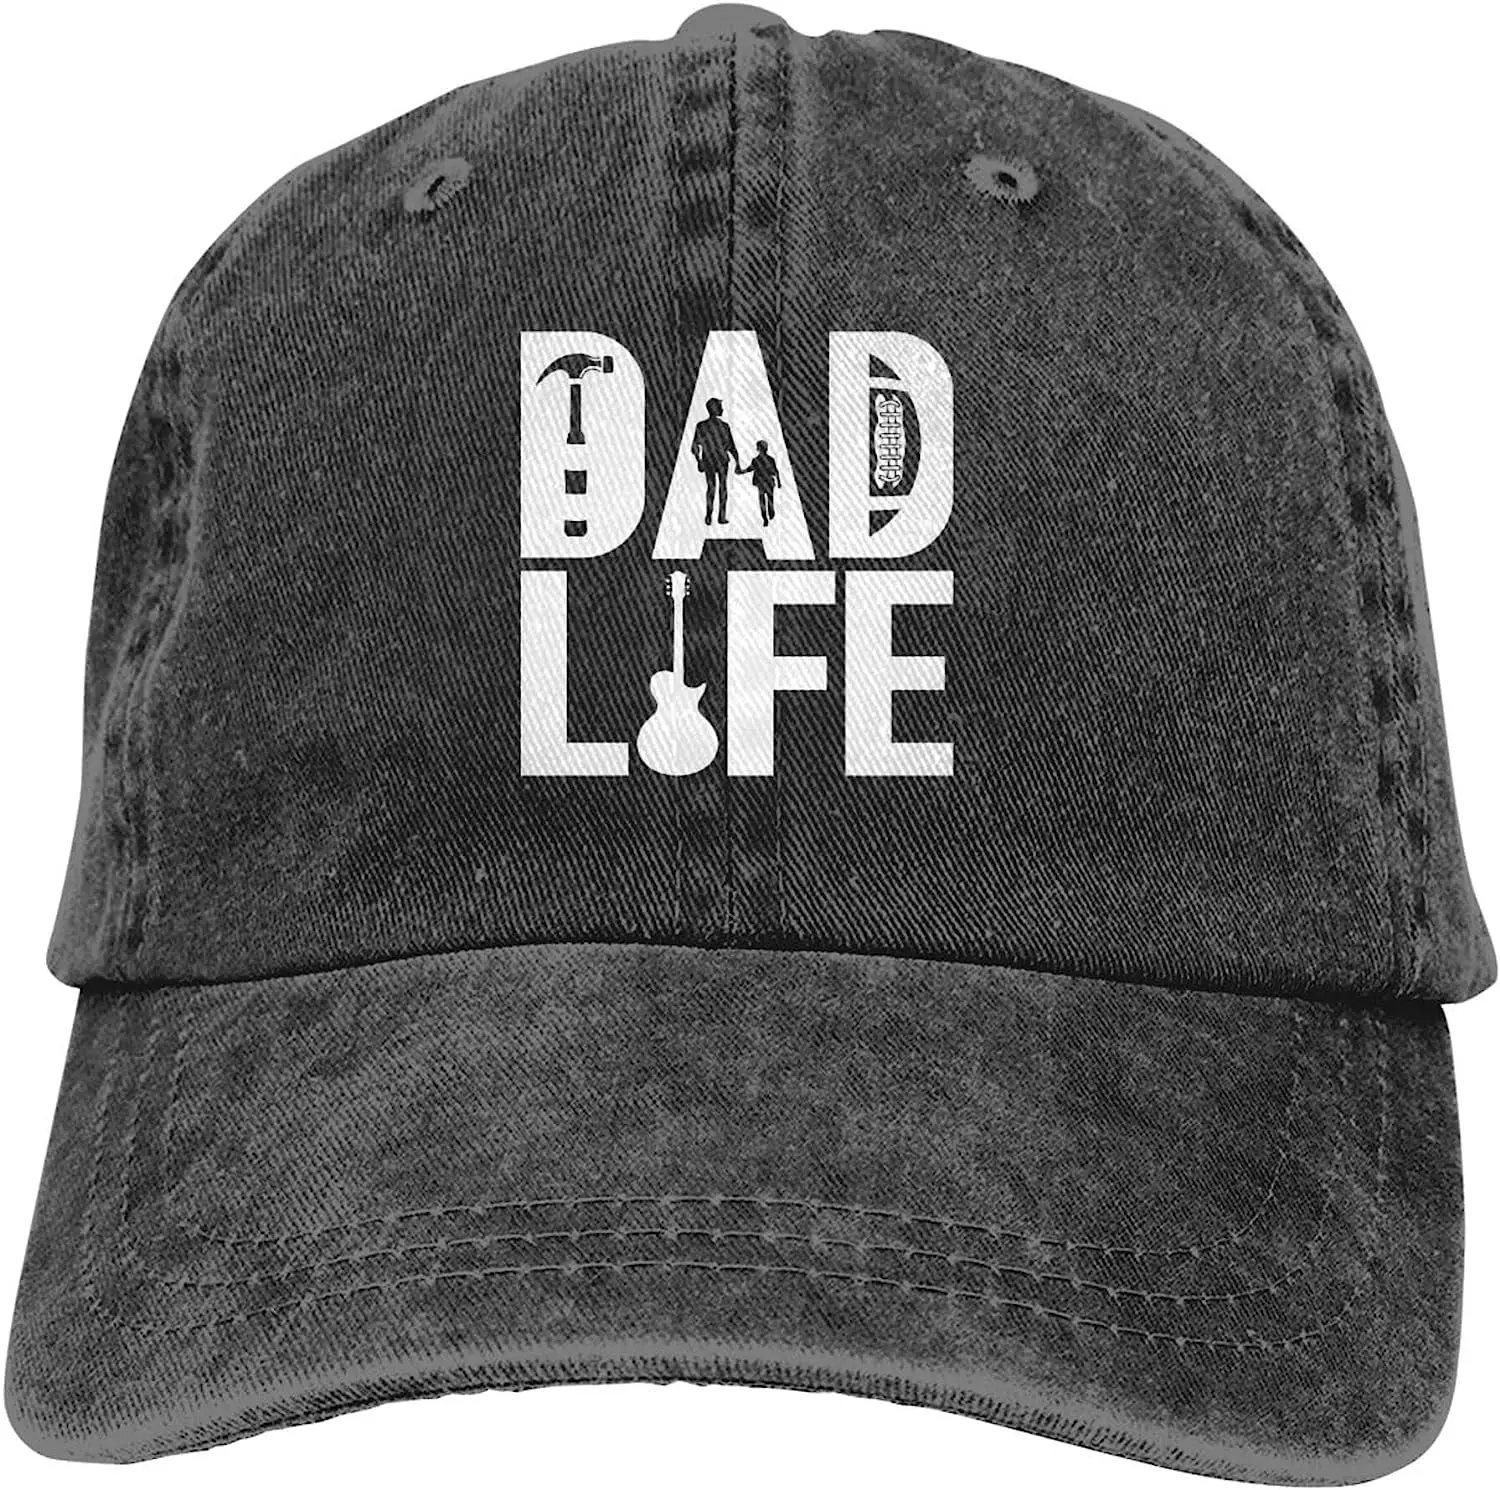 

Adjustable Washed Dad Life Hats Distressed Dad Hats Low Profile Baseball Cap for Men Four Seasons Casual Unisex Trucker Hat